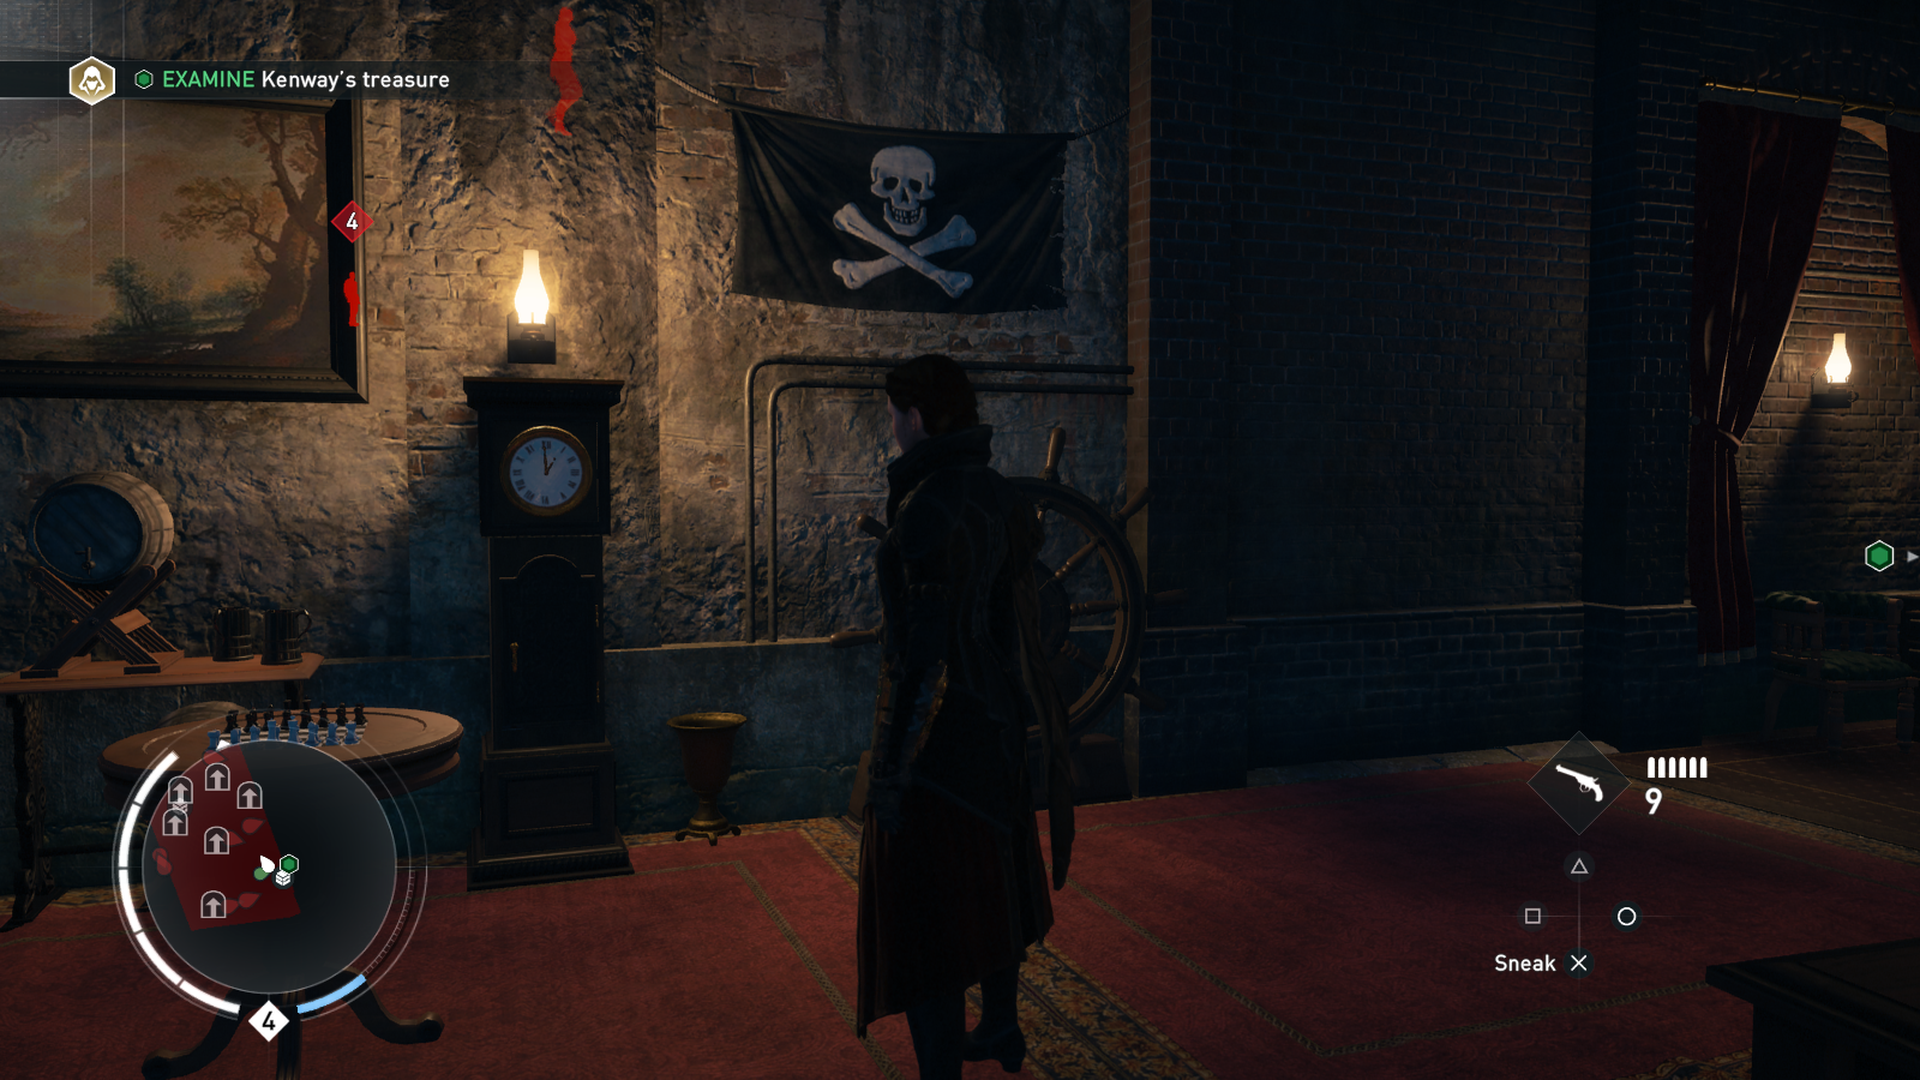 assassin's creed syndicate